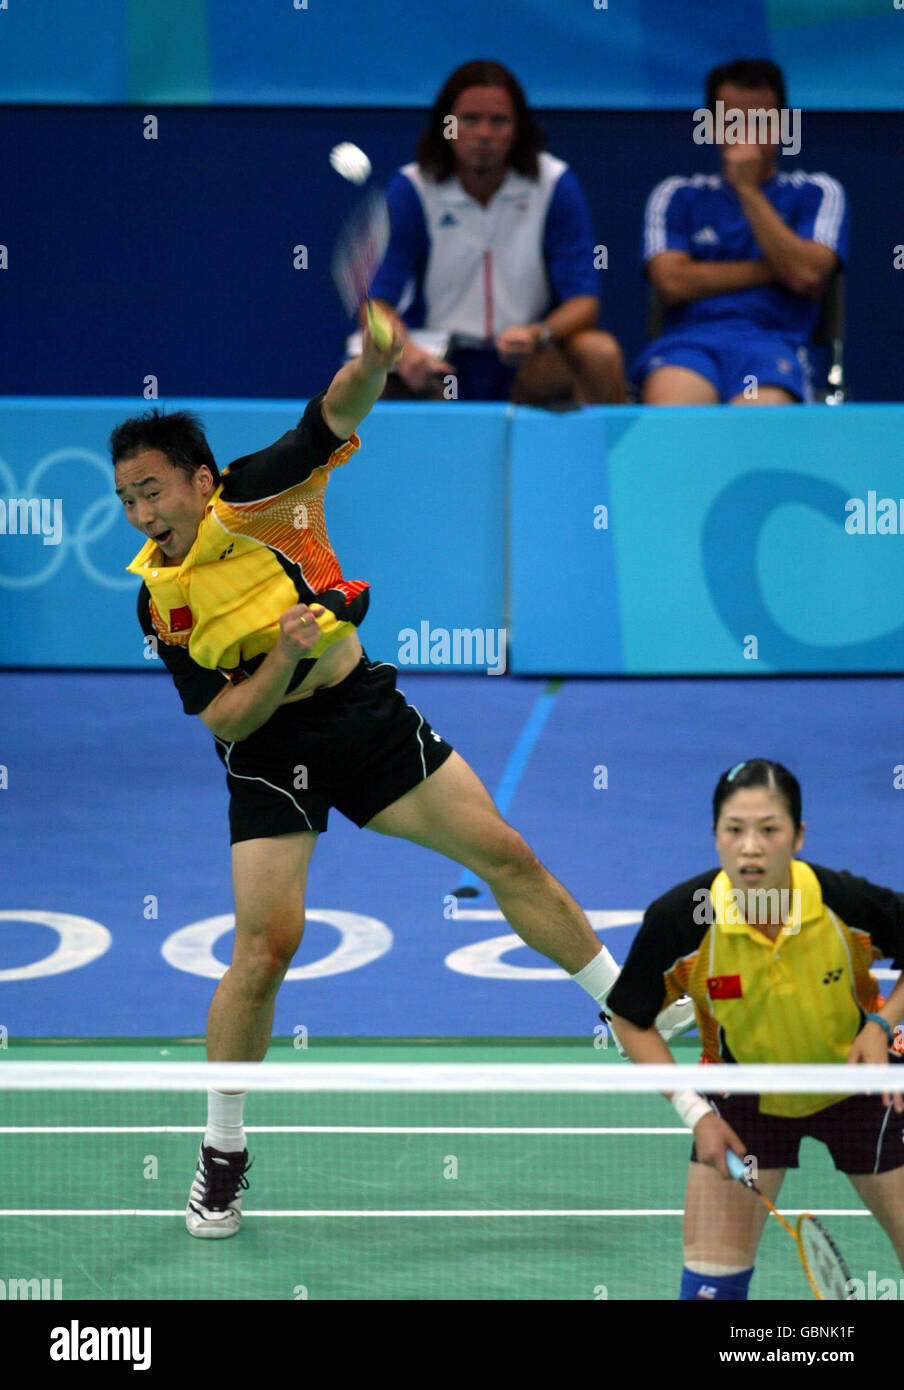 Badminton - Athens Olympic Games 2004 - Mixed Doubles - Final. China's Jun Zhang stretches high for a smash against Great Britain's Nathan Robertson and Gail Emms Stock Photo